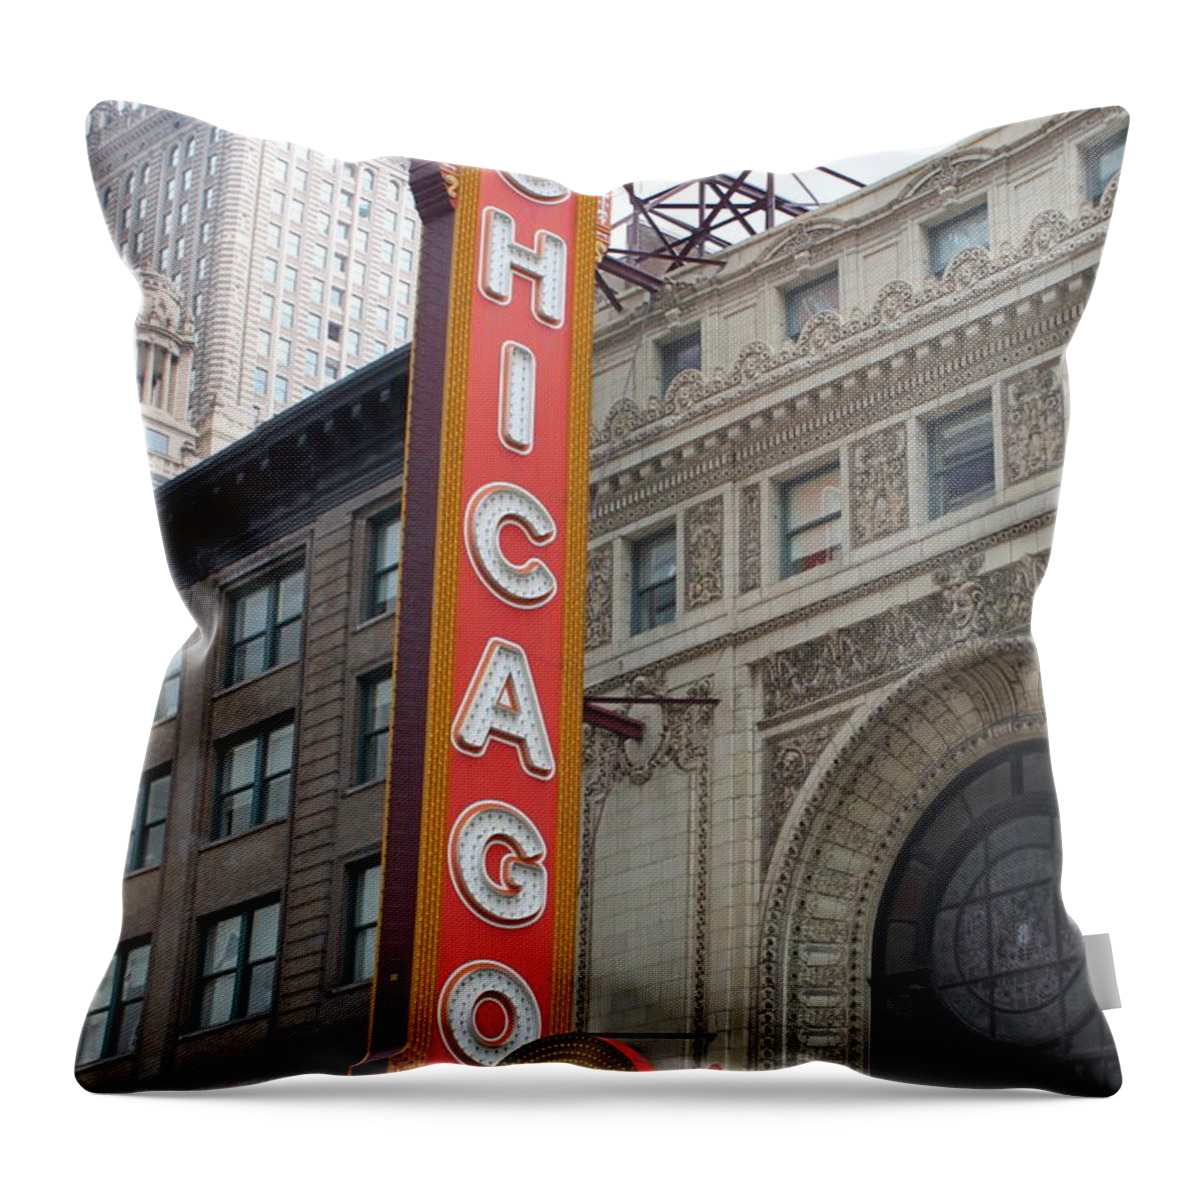 Chicago Throw Pillow featuring the photograph Chicago Theater Sign by Lauri Novak